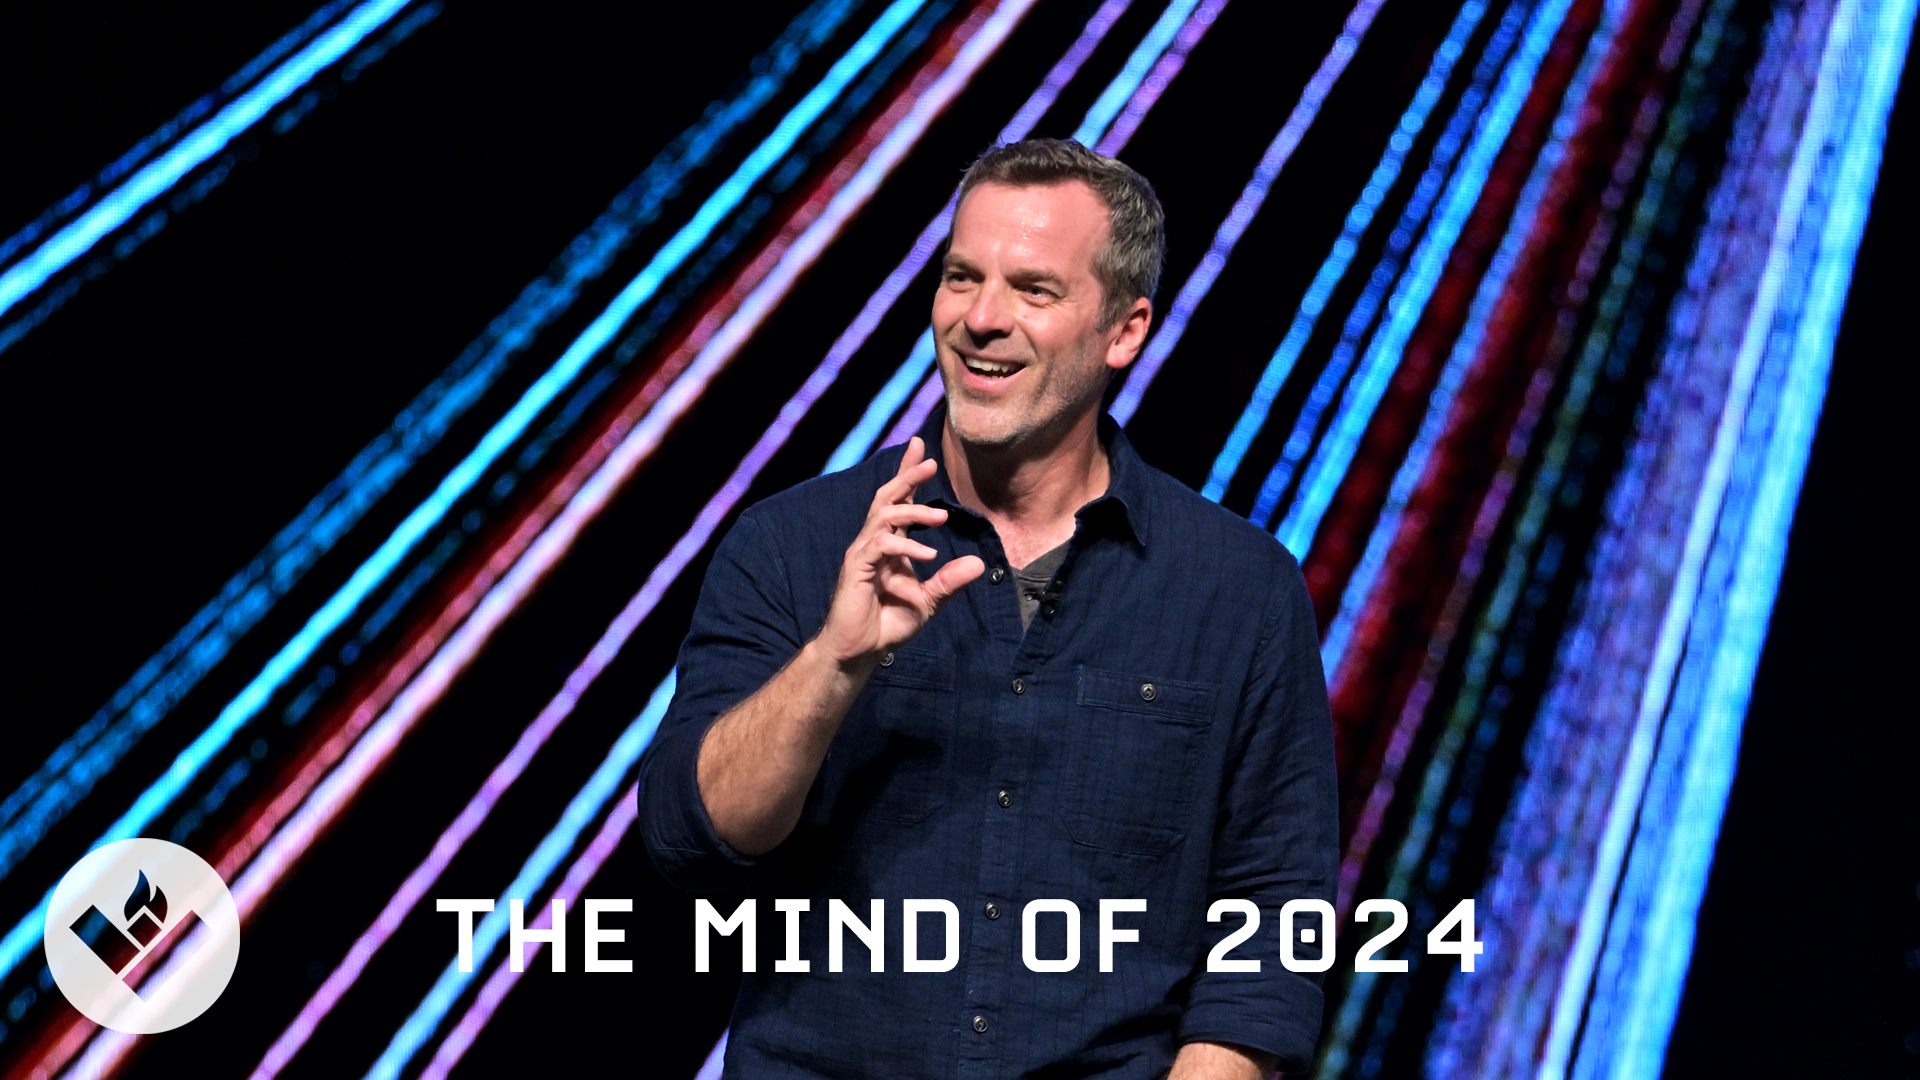 The Mind of 2024